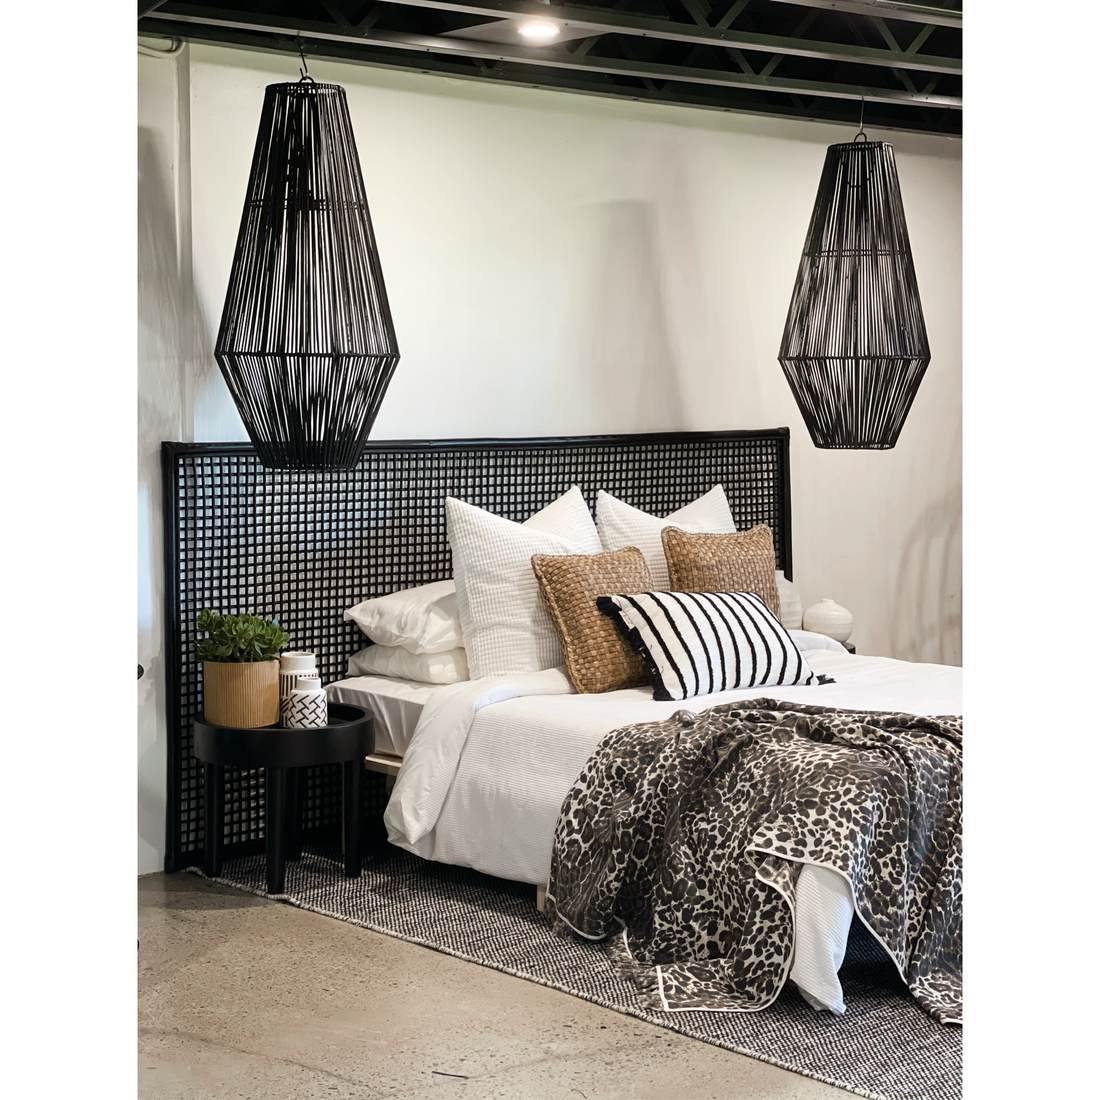 Black Rattan Extra-Wide Bedhead | The Styling Republic